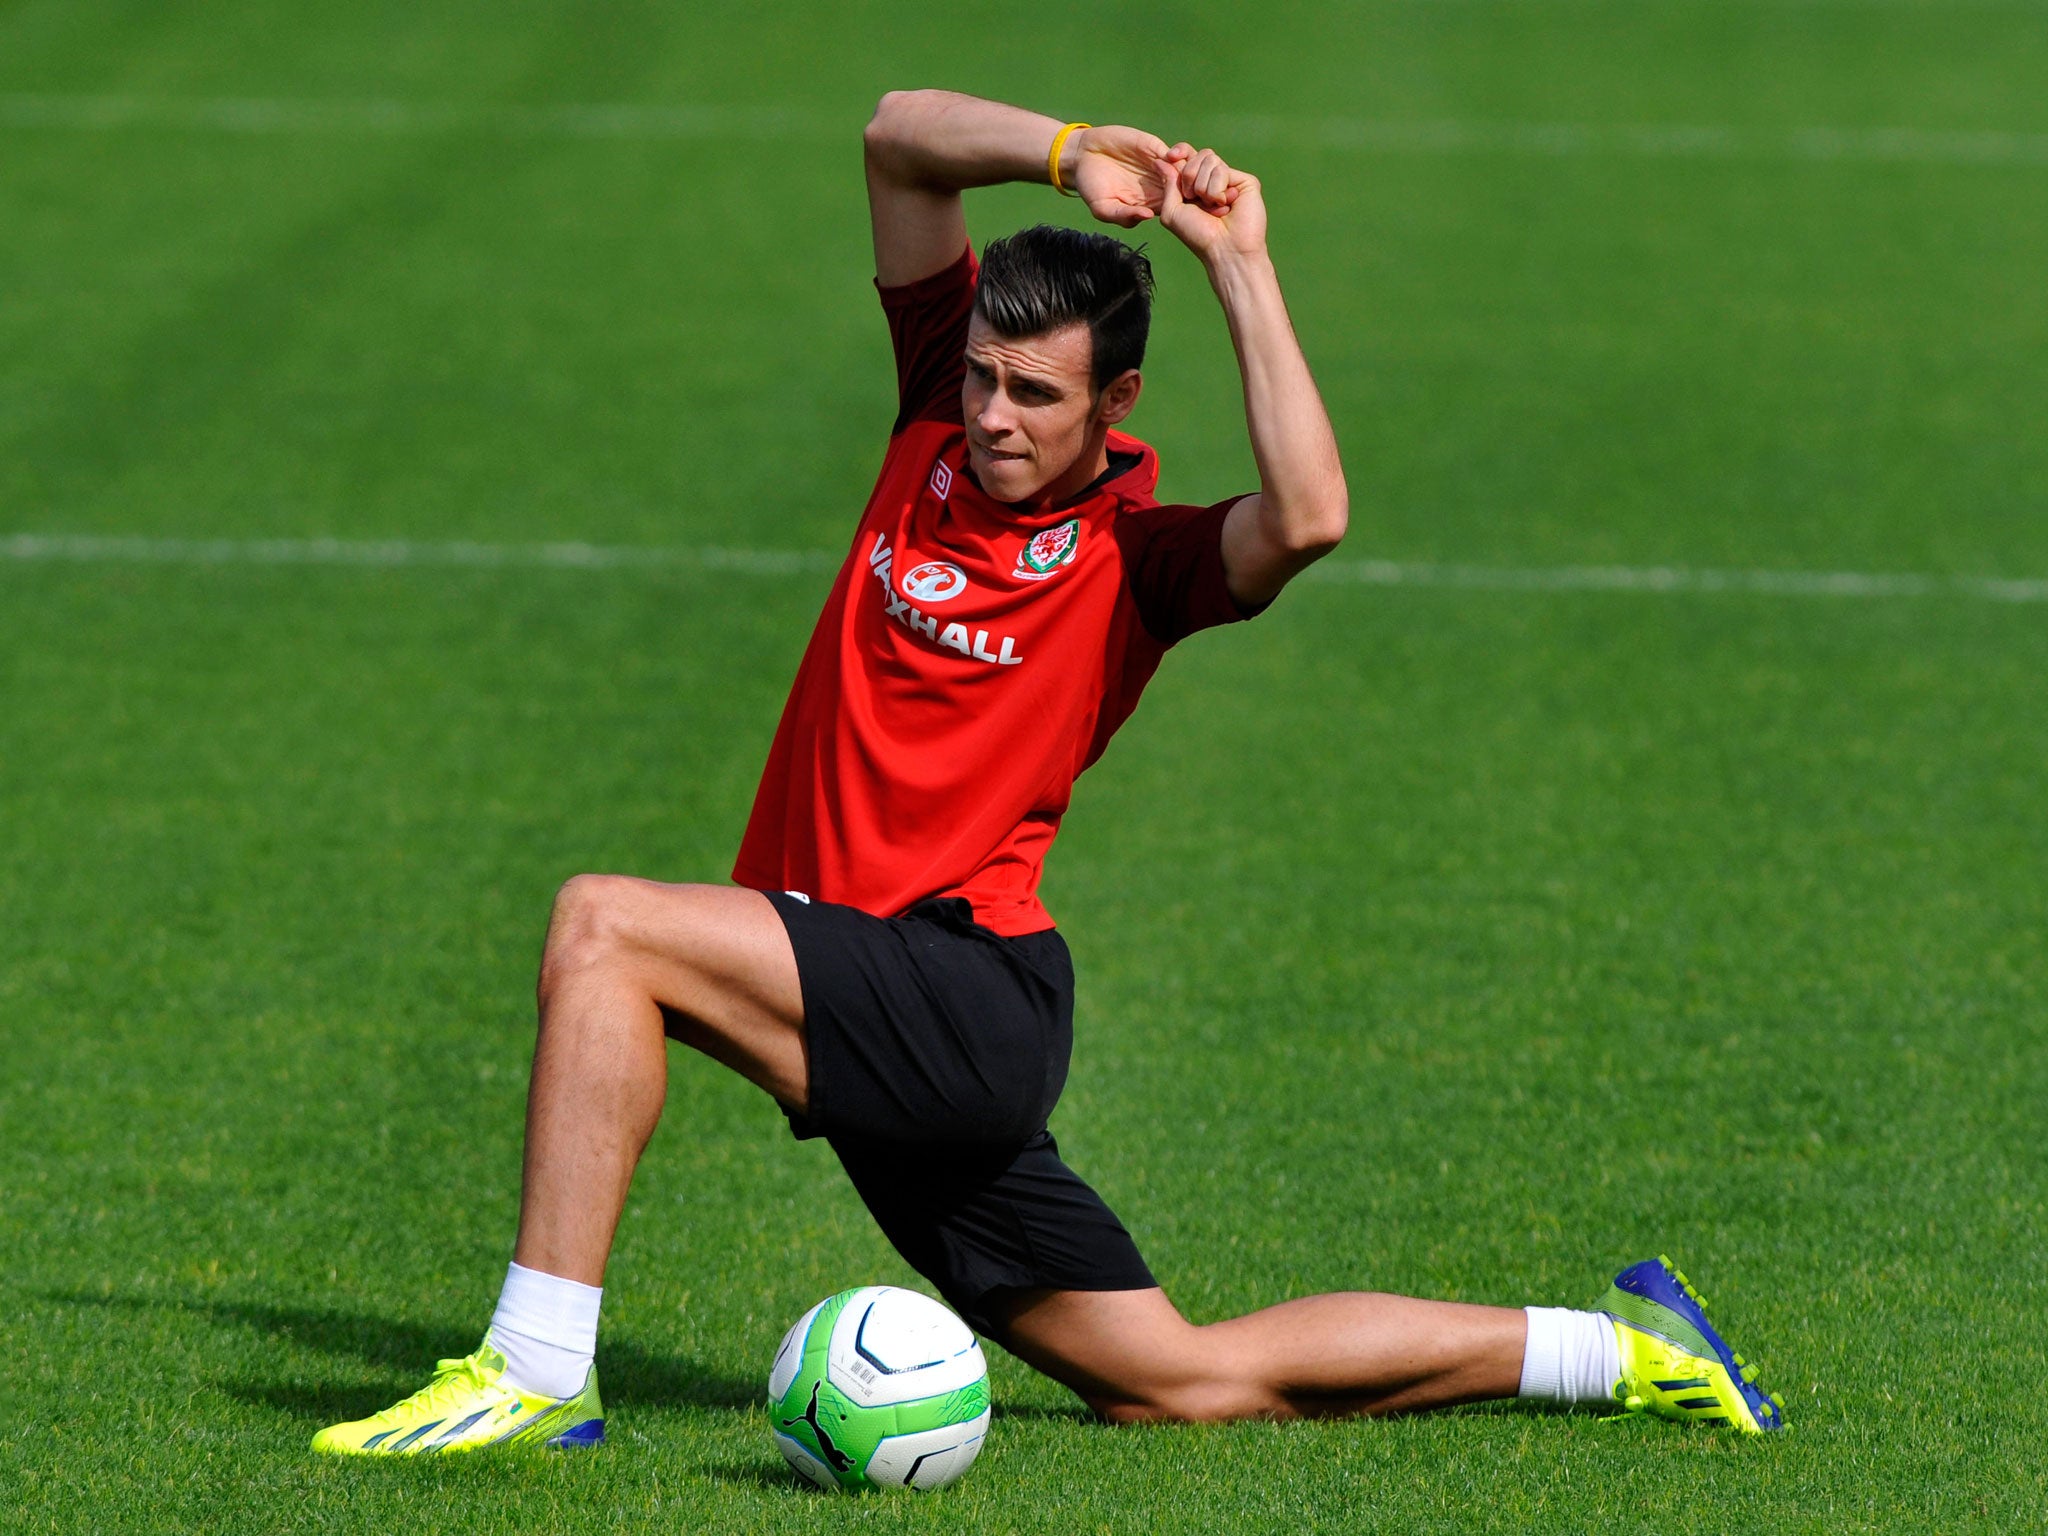 Gareth Bale trained with the Wales team earlier today